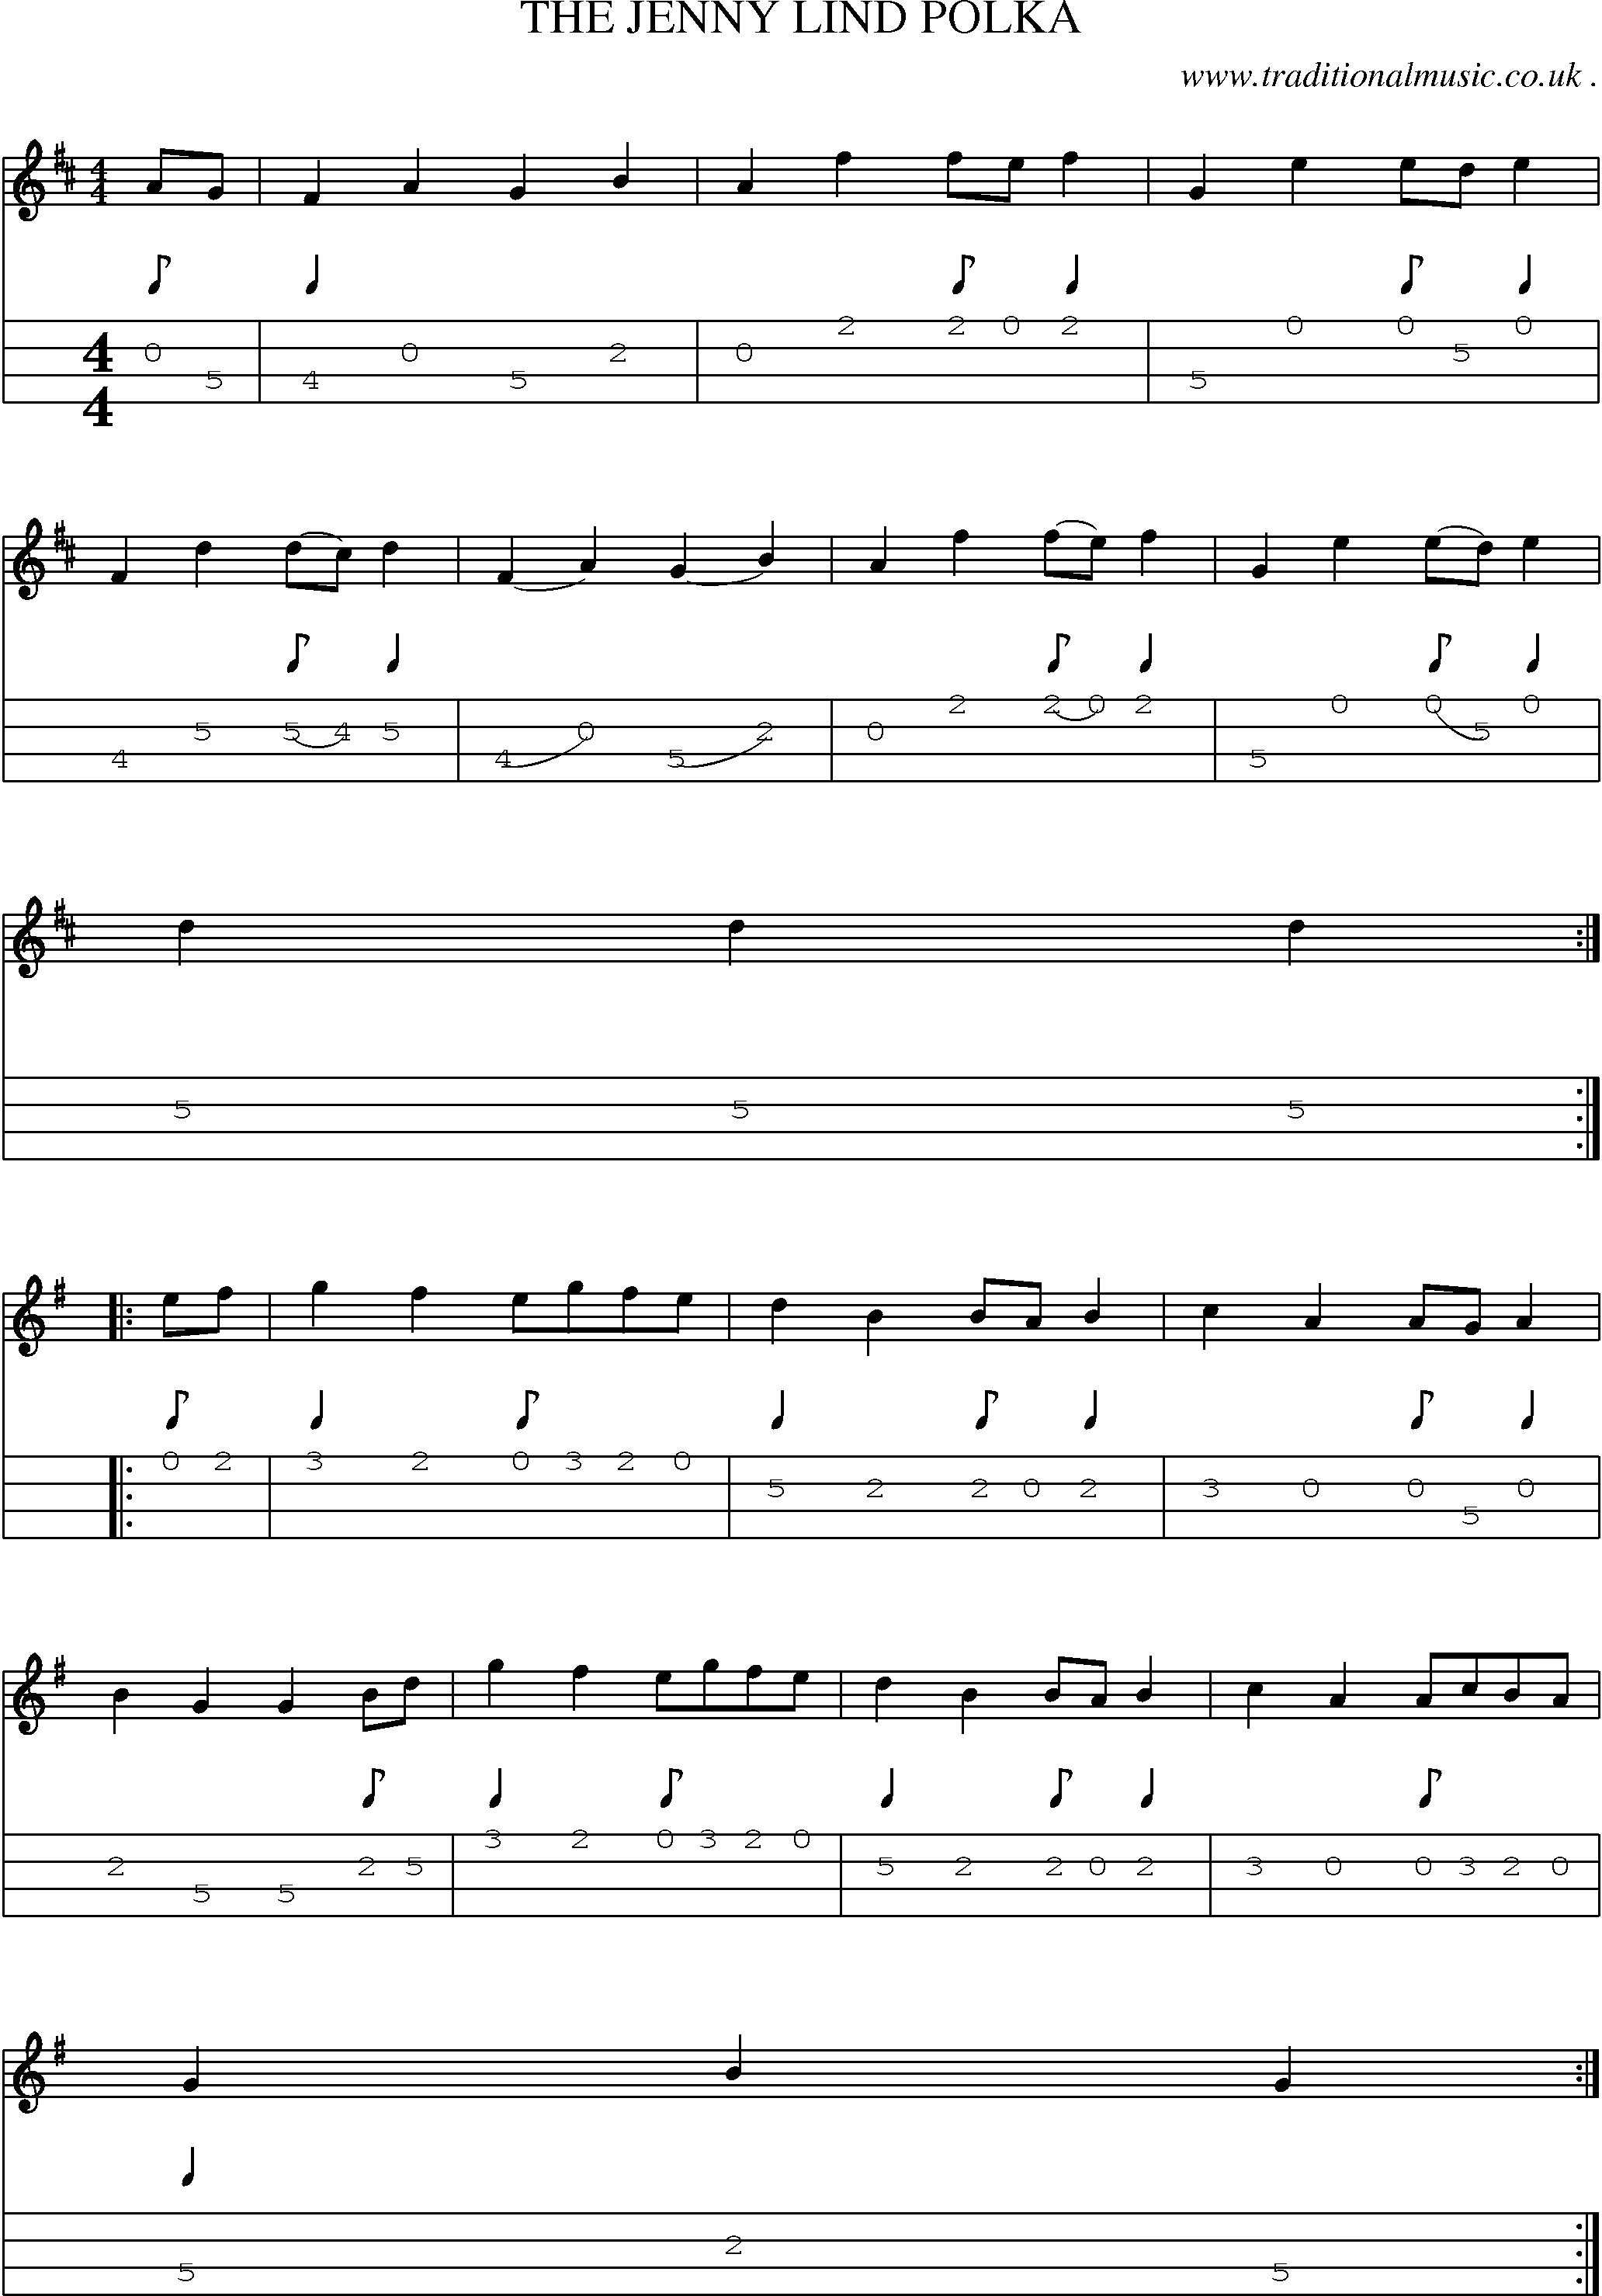 Music Score and Mandolin Tabs for The Jenny Lind Polka